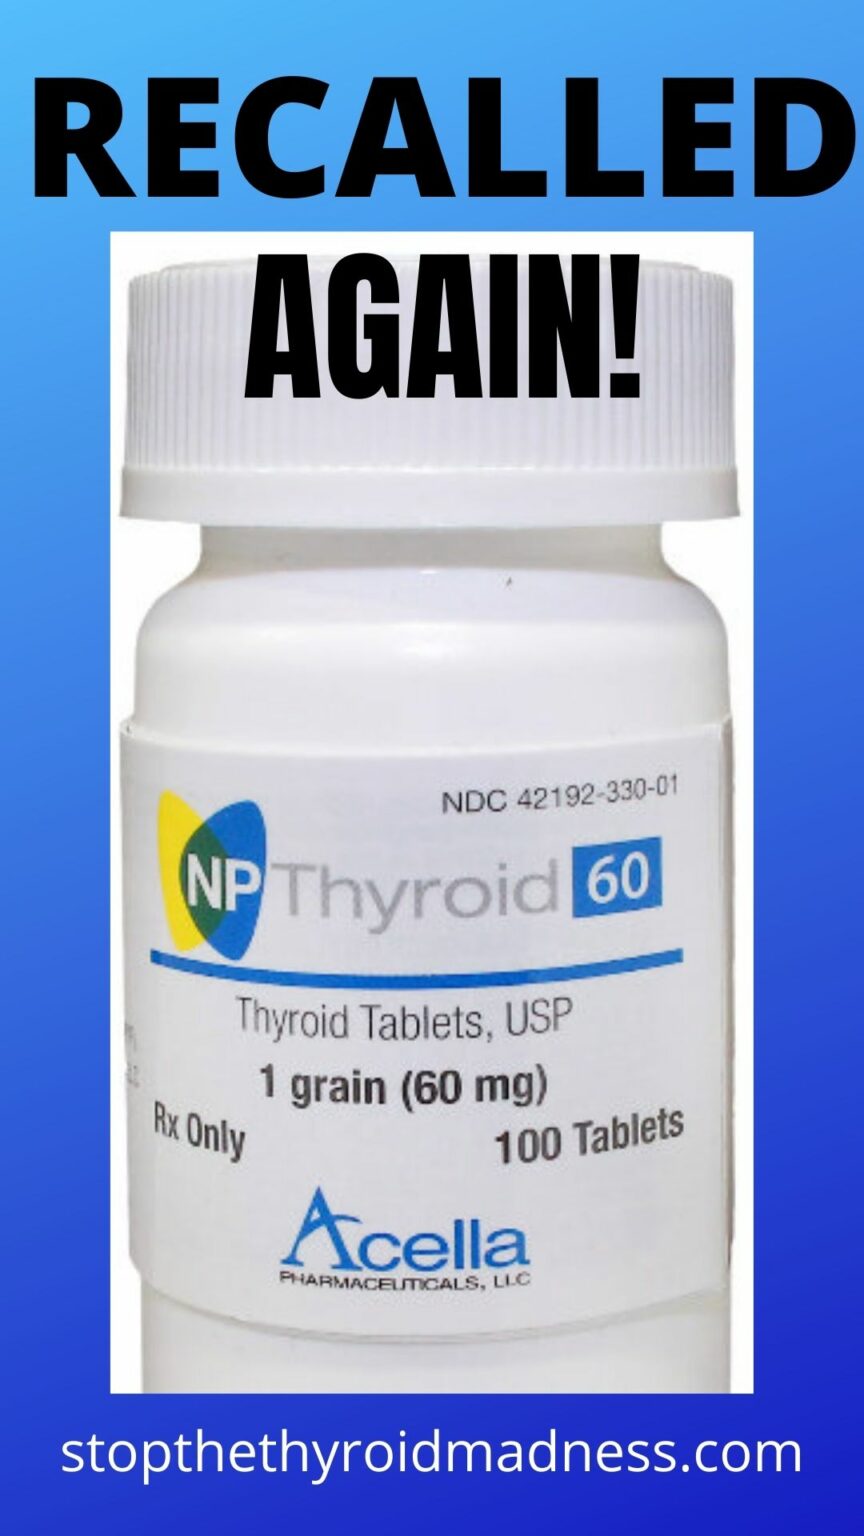 NP Thyroid by Acella has once again been recalled! Stop The Thyroid